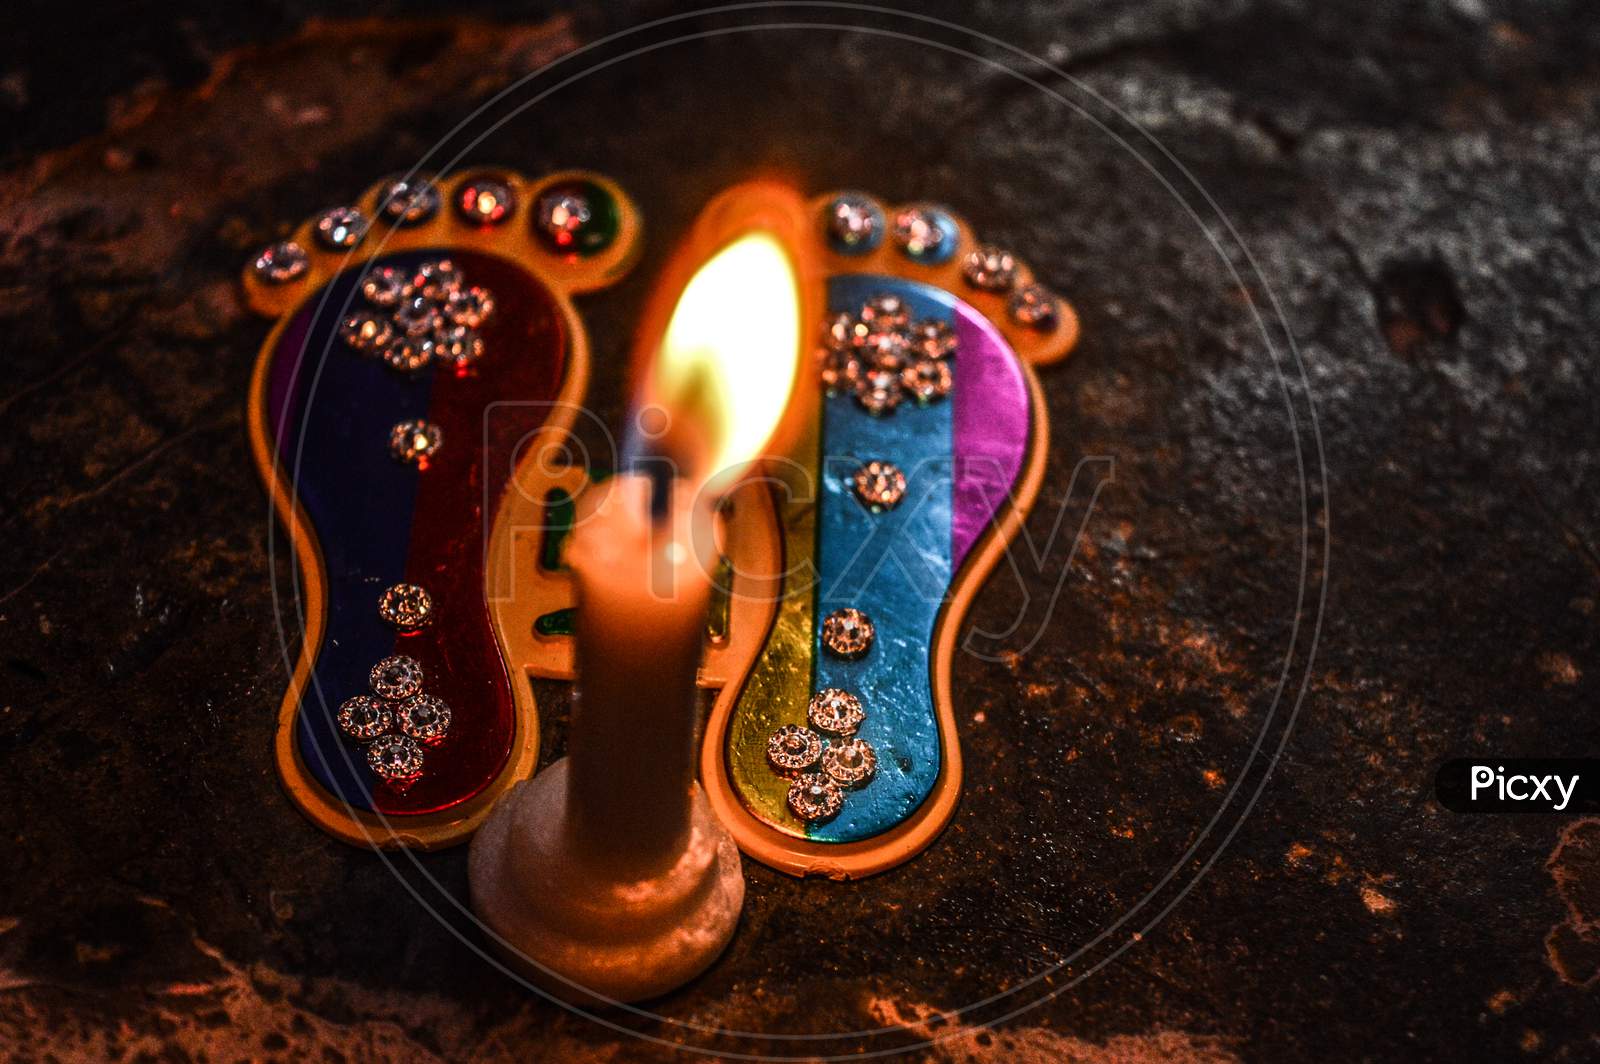 Footprint Of God On Indian Festival Diwali Deepawali With Fire Isolated On Table